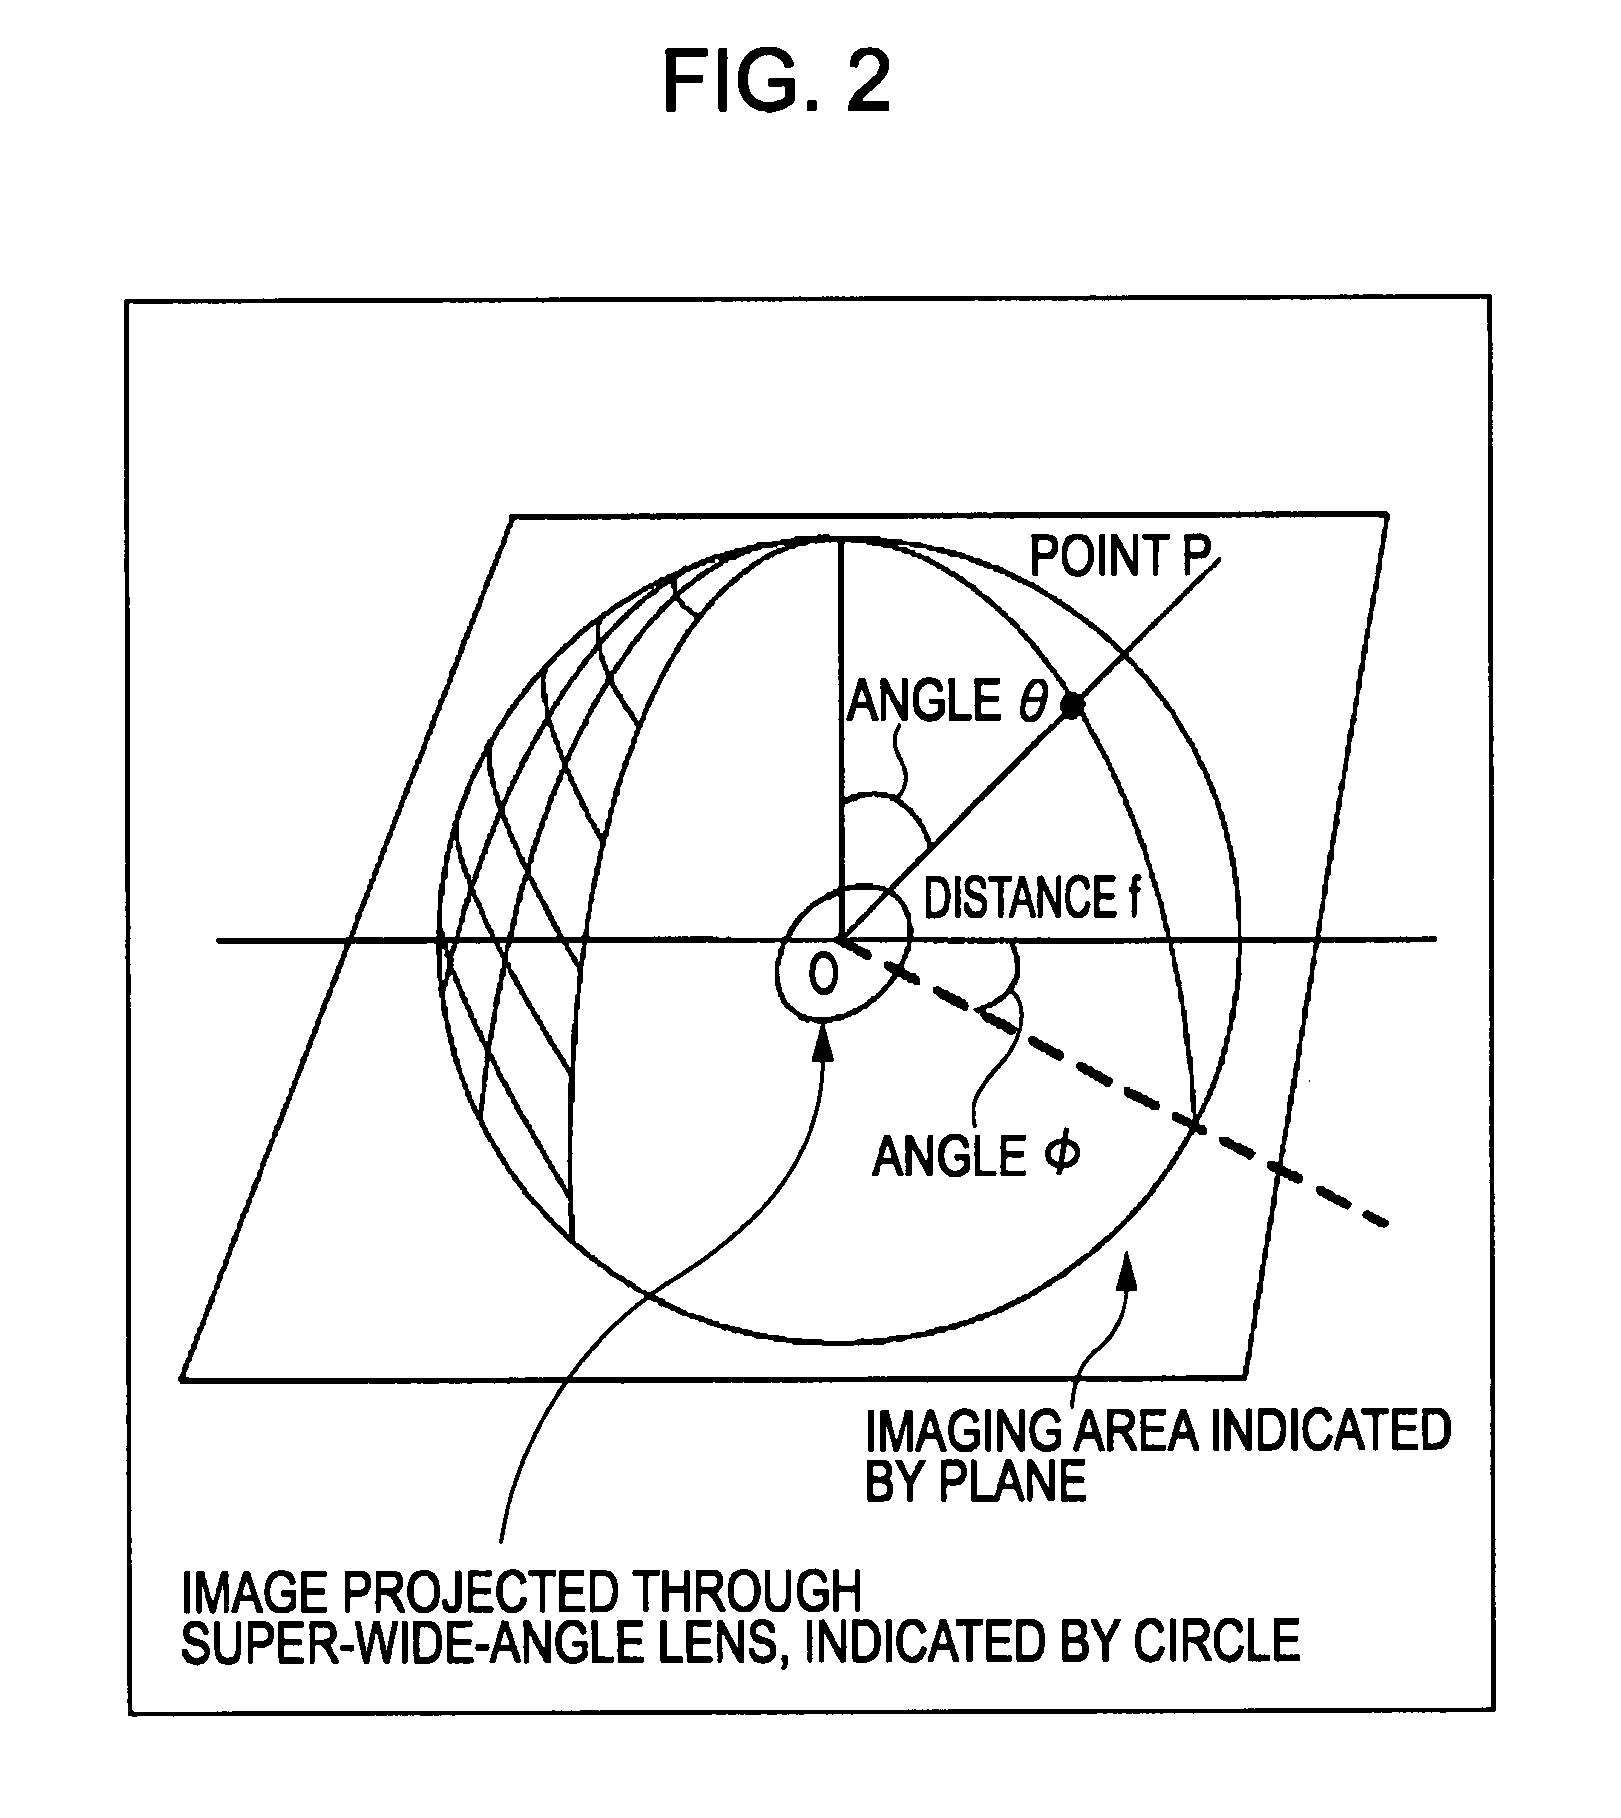 Camera device and monitoring system